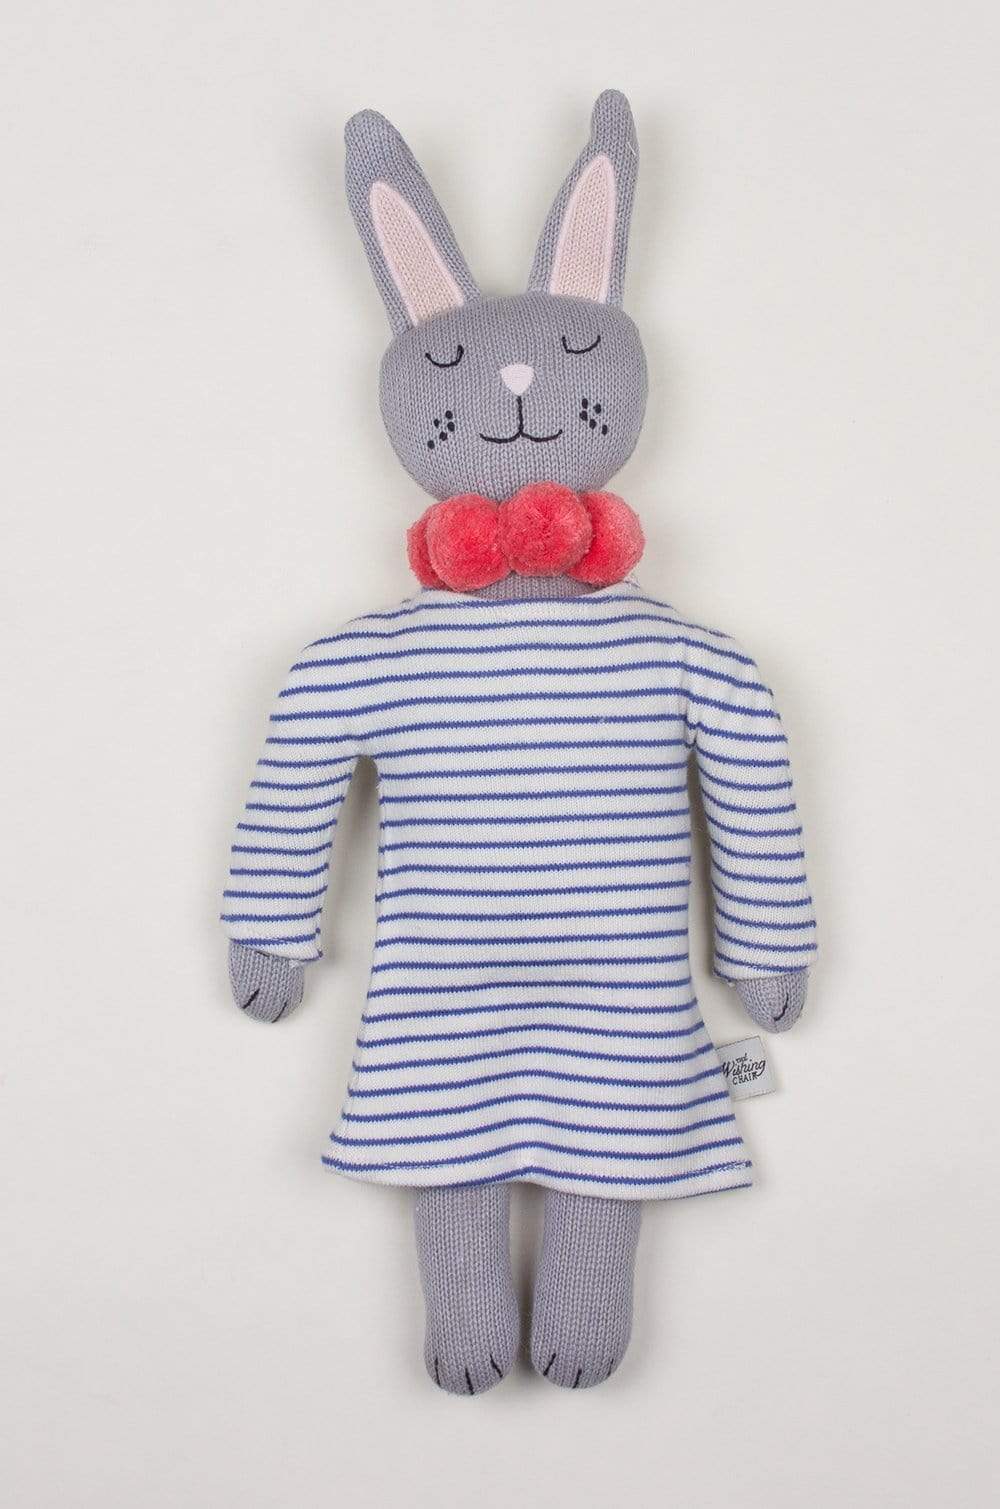 Miss Stripes Knitted Cotton Toy